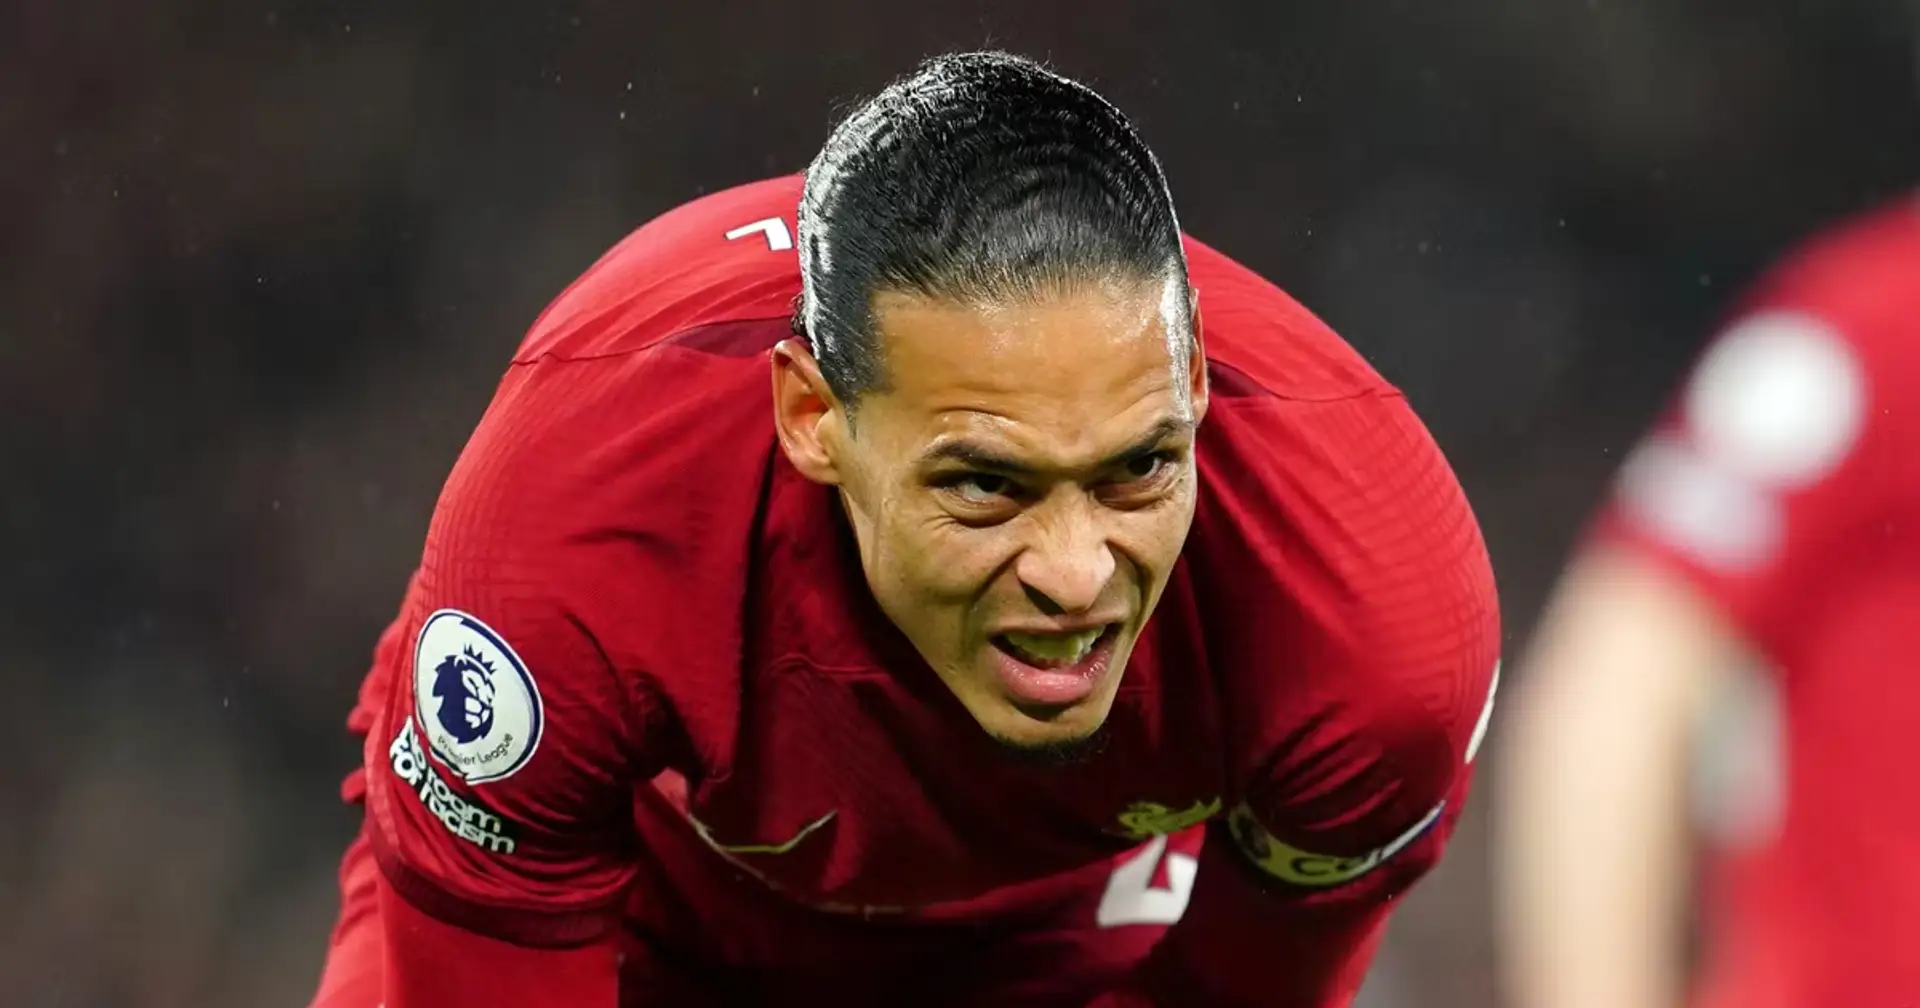 Van Dijk claims playing too much hampered his form & 2 more big stories you might've missed